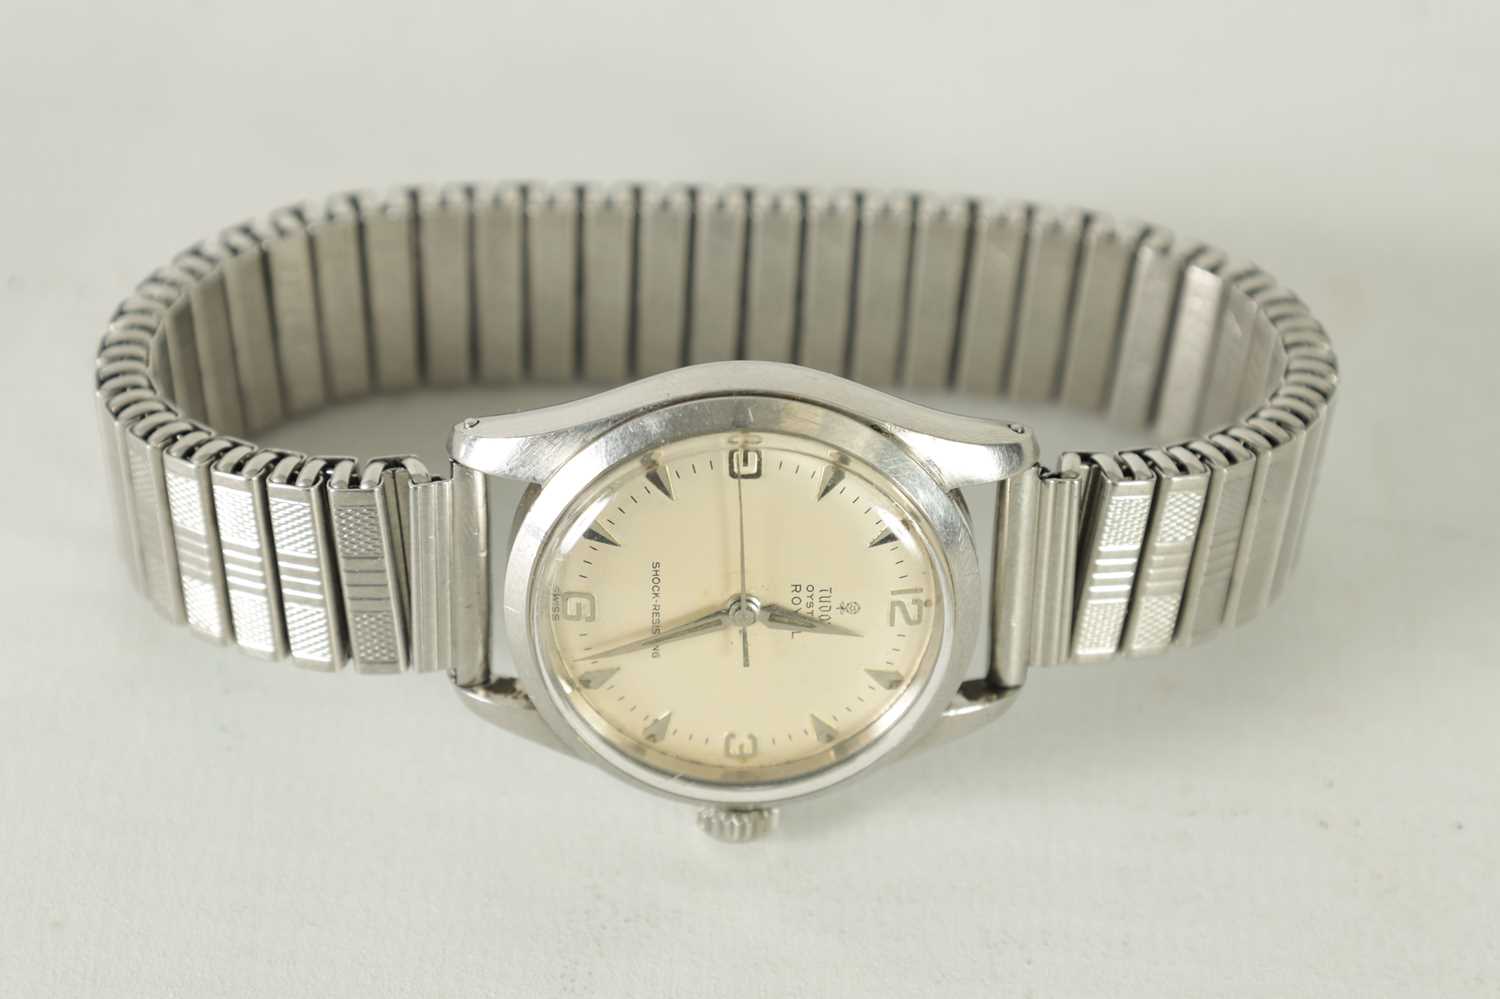 A GENTLEMAN'S 1950's STEEL TUDOR OYSTER ROYAL MANUAL WRIST WATCH - Image 3 of 5